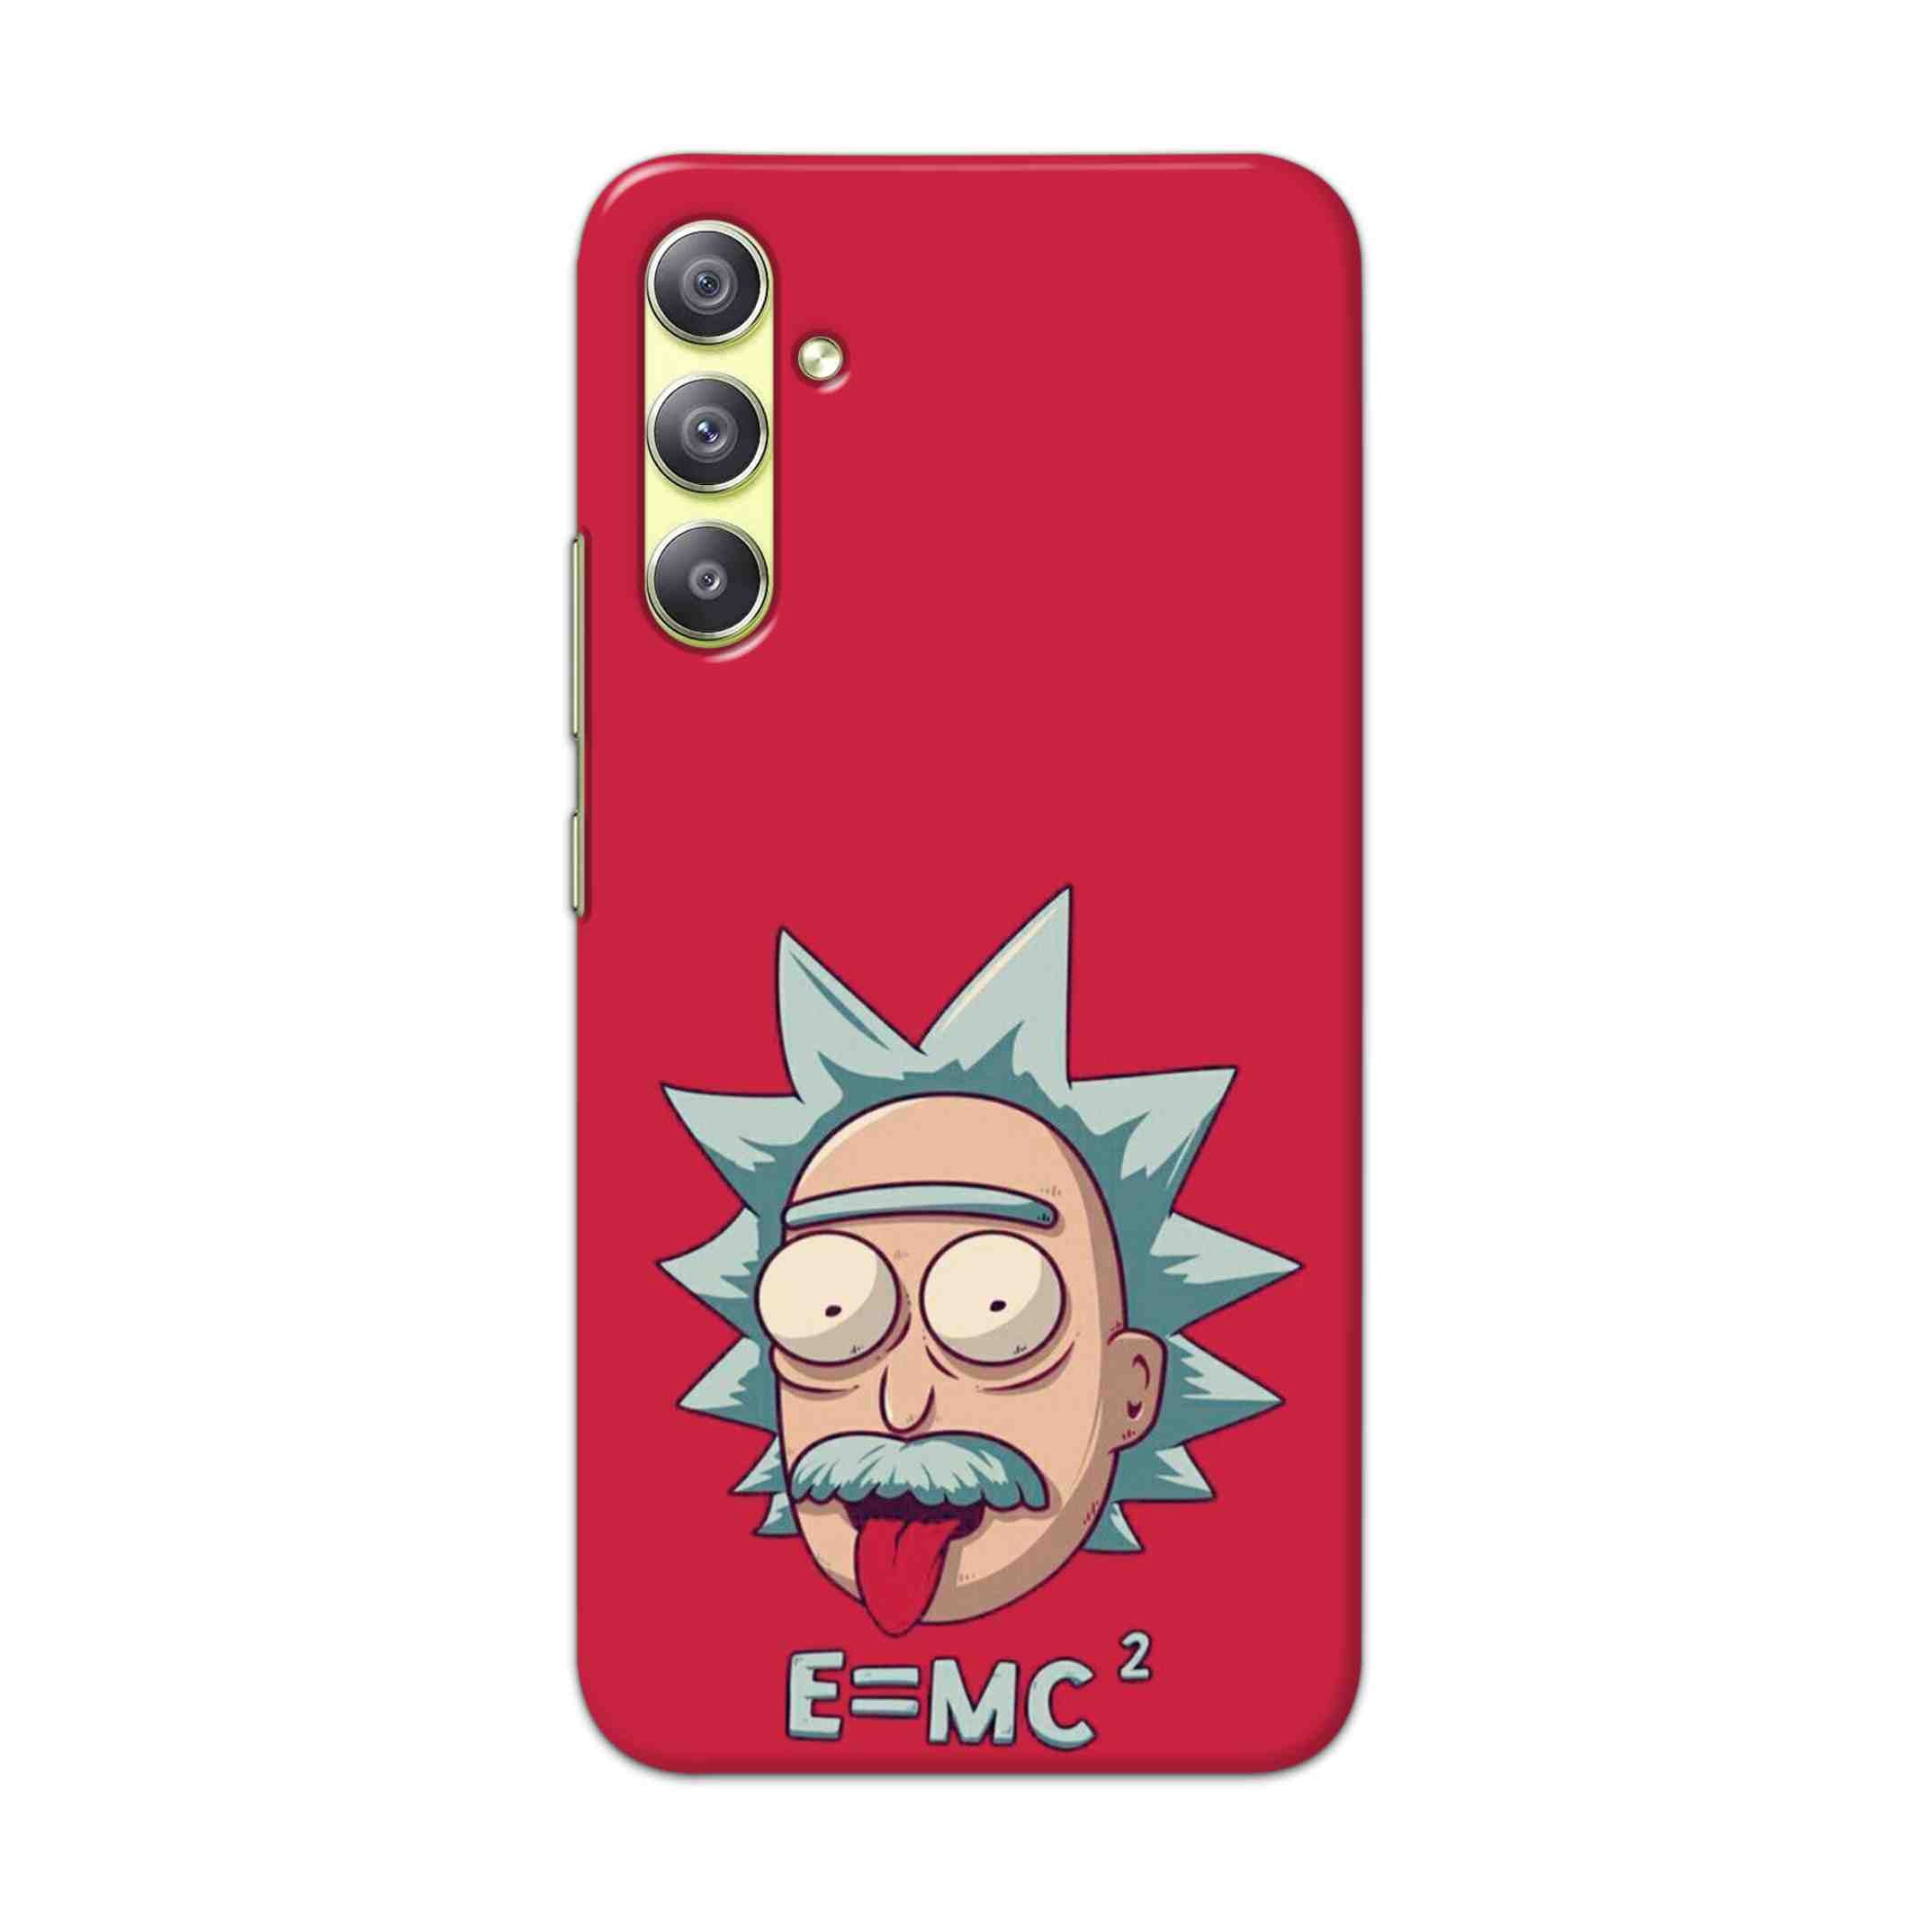 Buy E=Mc Hard Back Mobile Phone Case Cover For Samsung Galaxy A34 5G Online